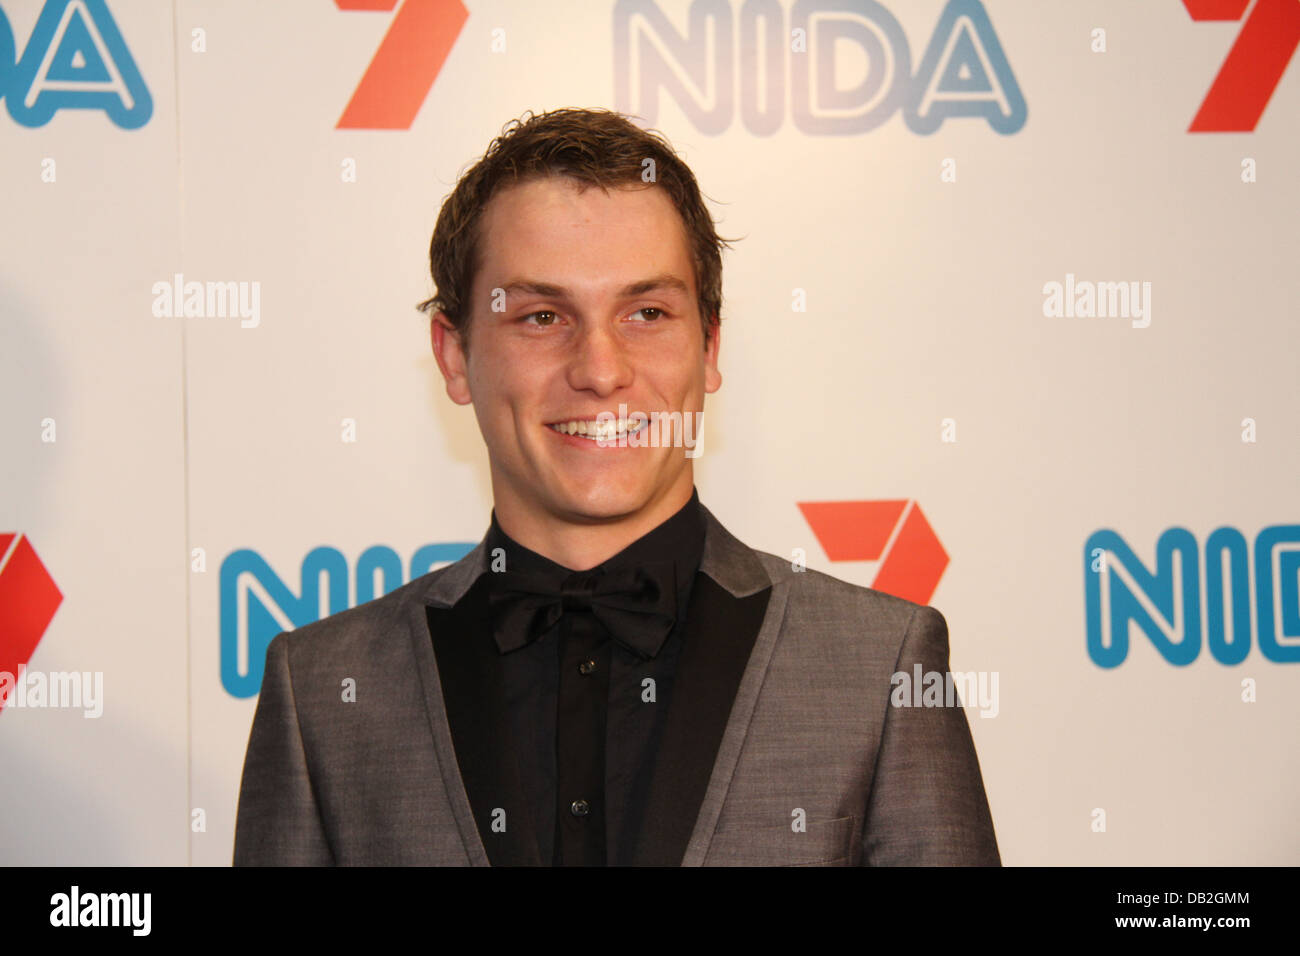 Jake Speer arrives on the red carpet for the annual NIDA Foundation Trust Gala in Sydney, Australia. Stock Photo